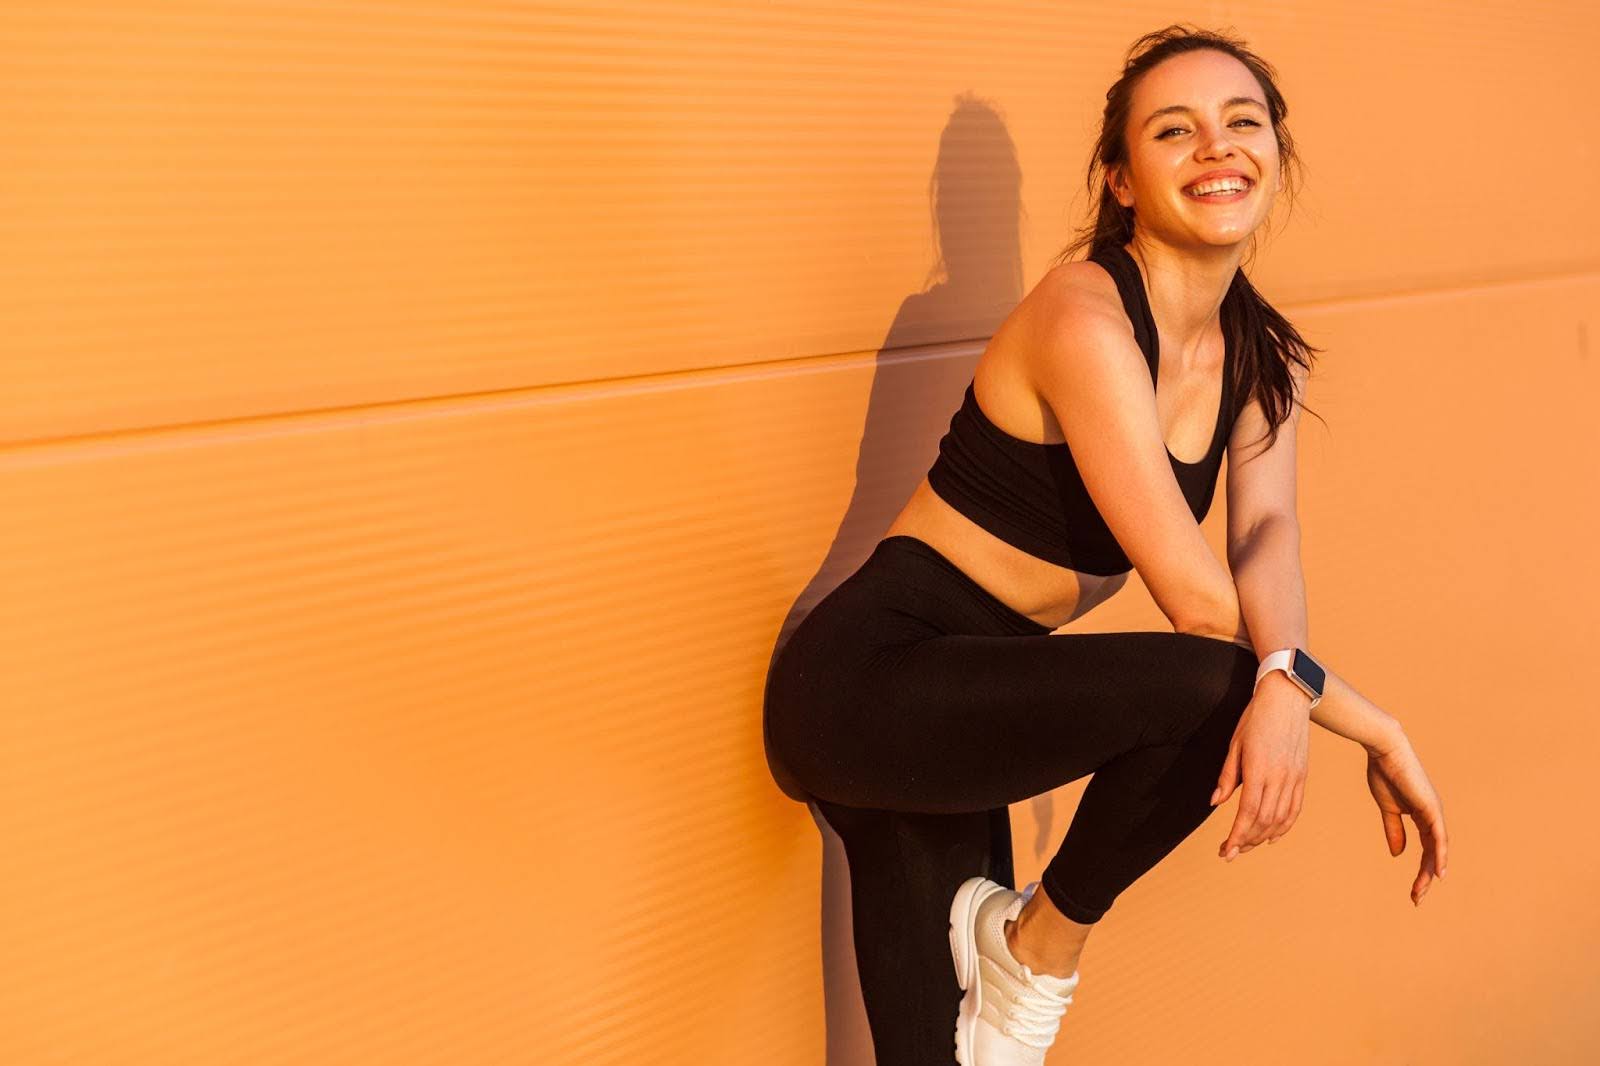 Fit woman leaning up against an orange wall after a Pilates workout